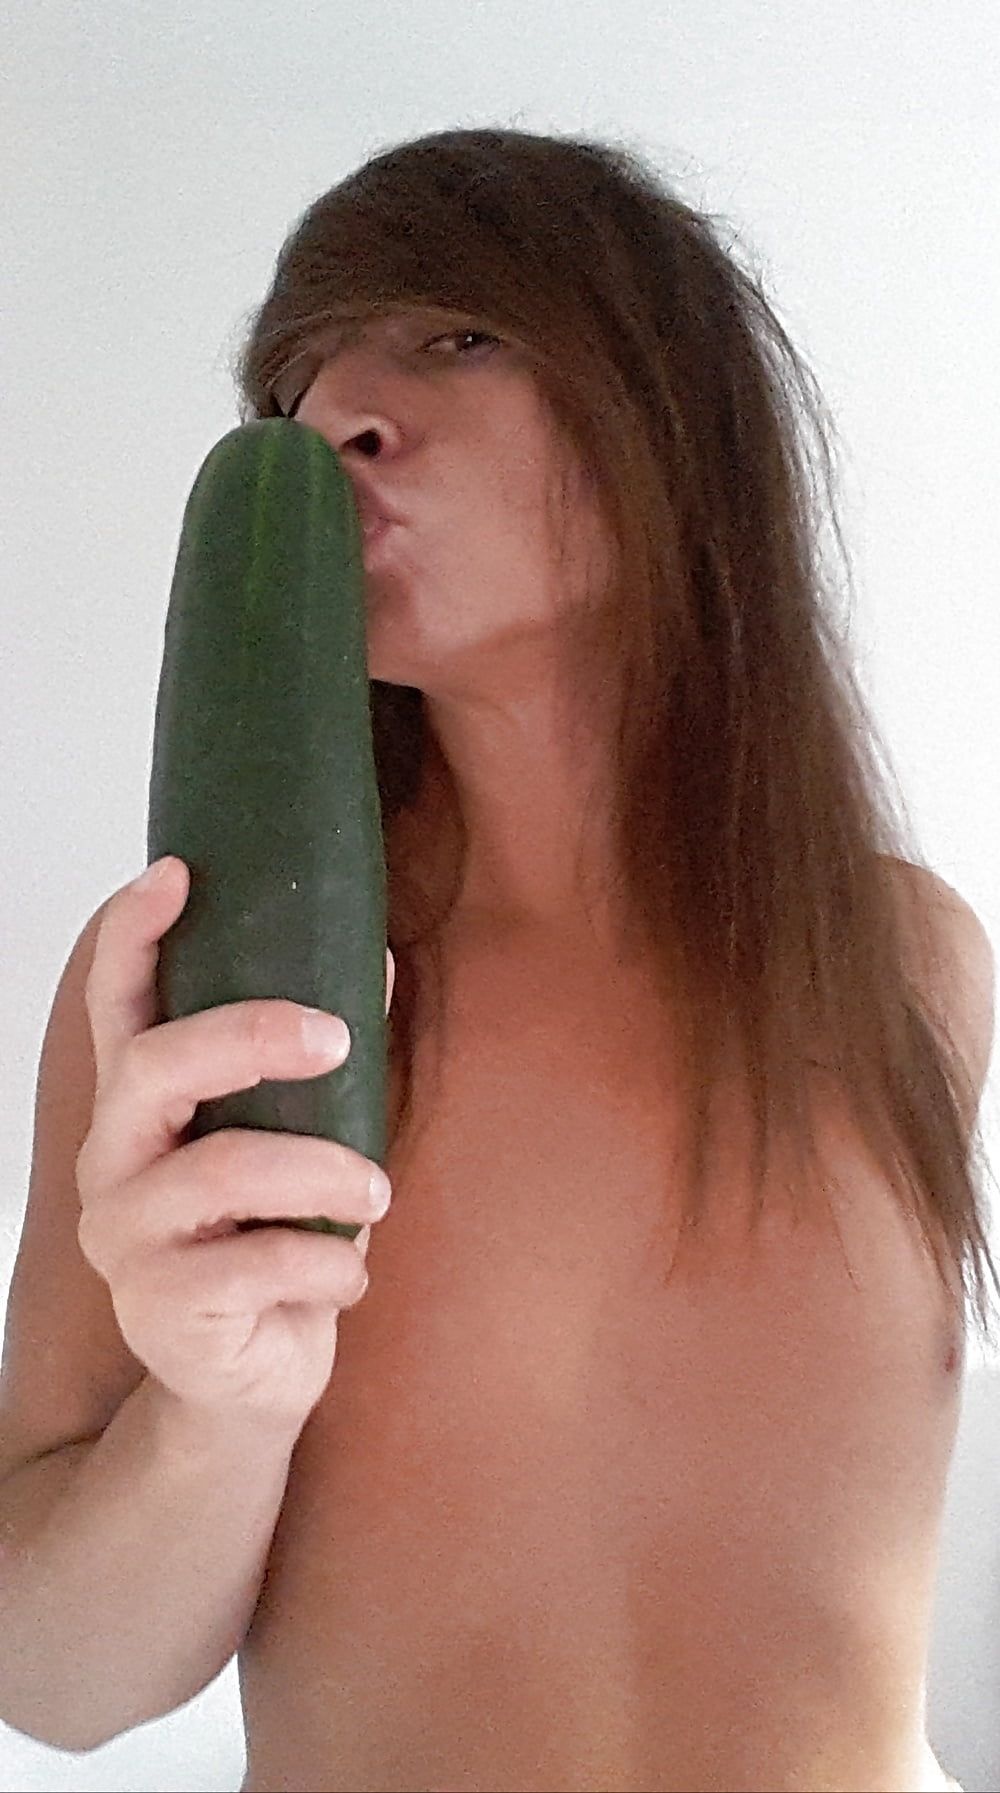 Preview on my next cumcumber session. #7